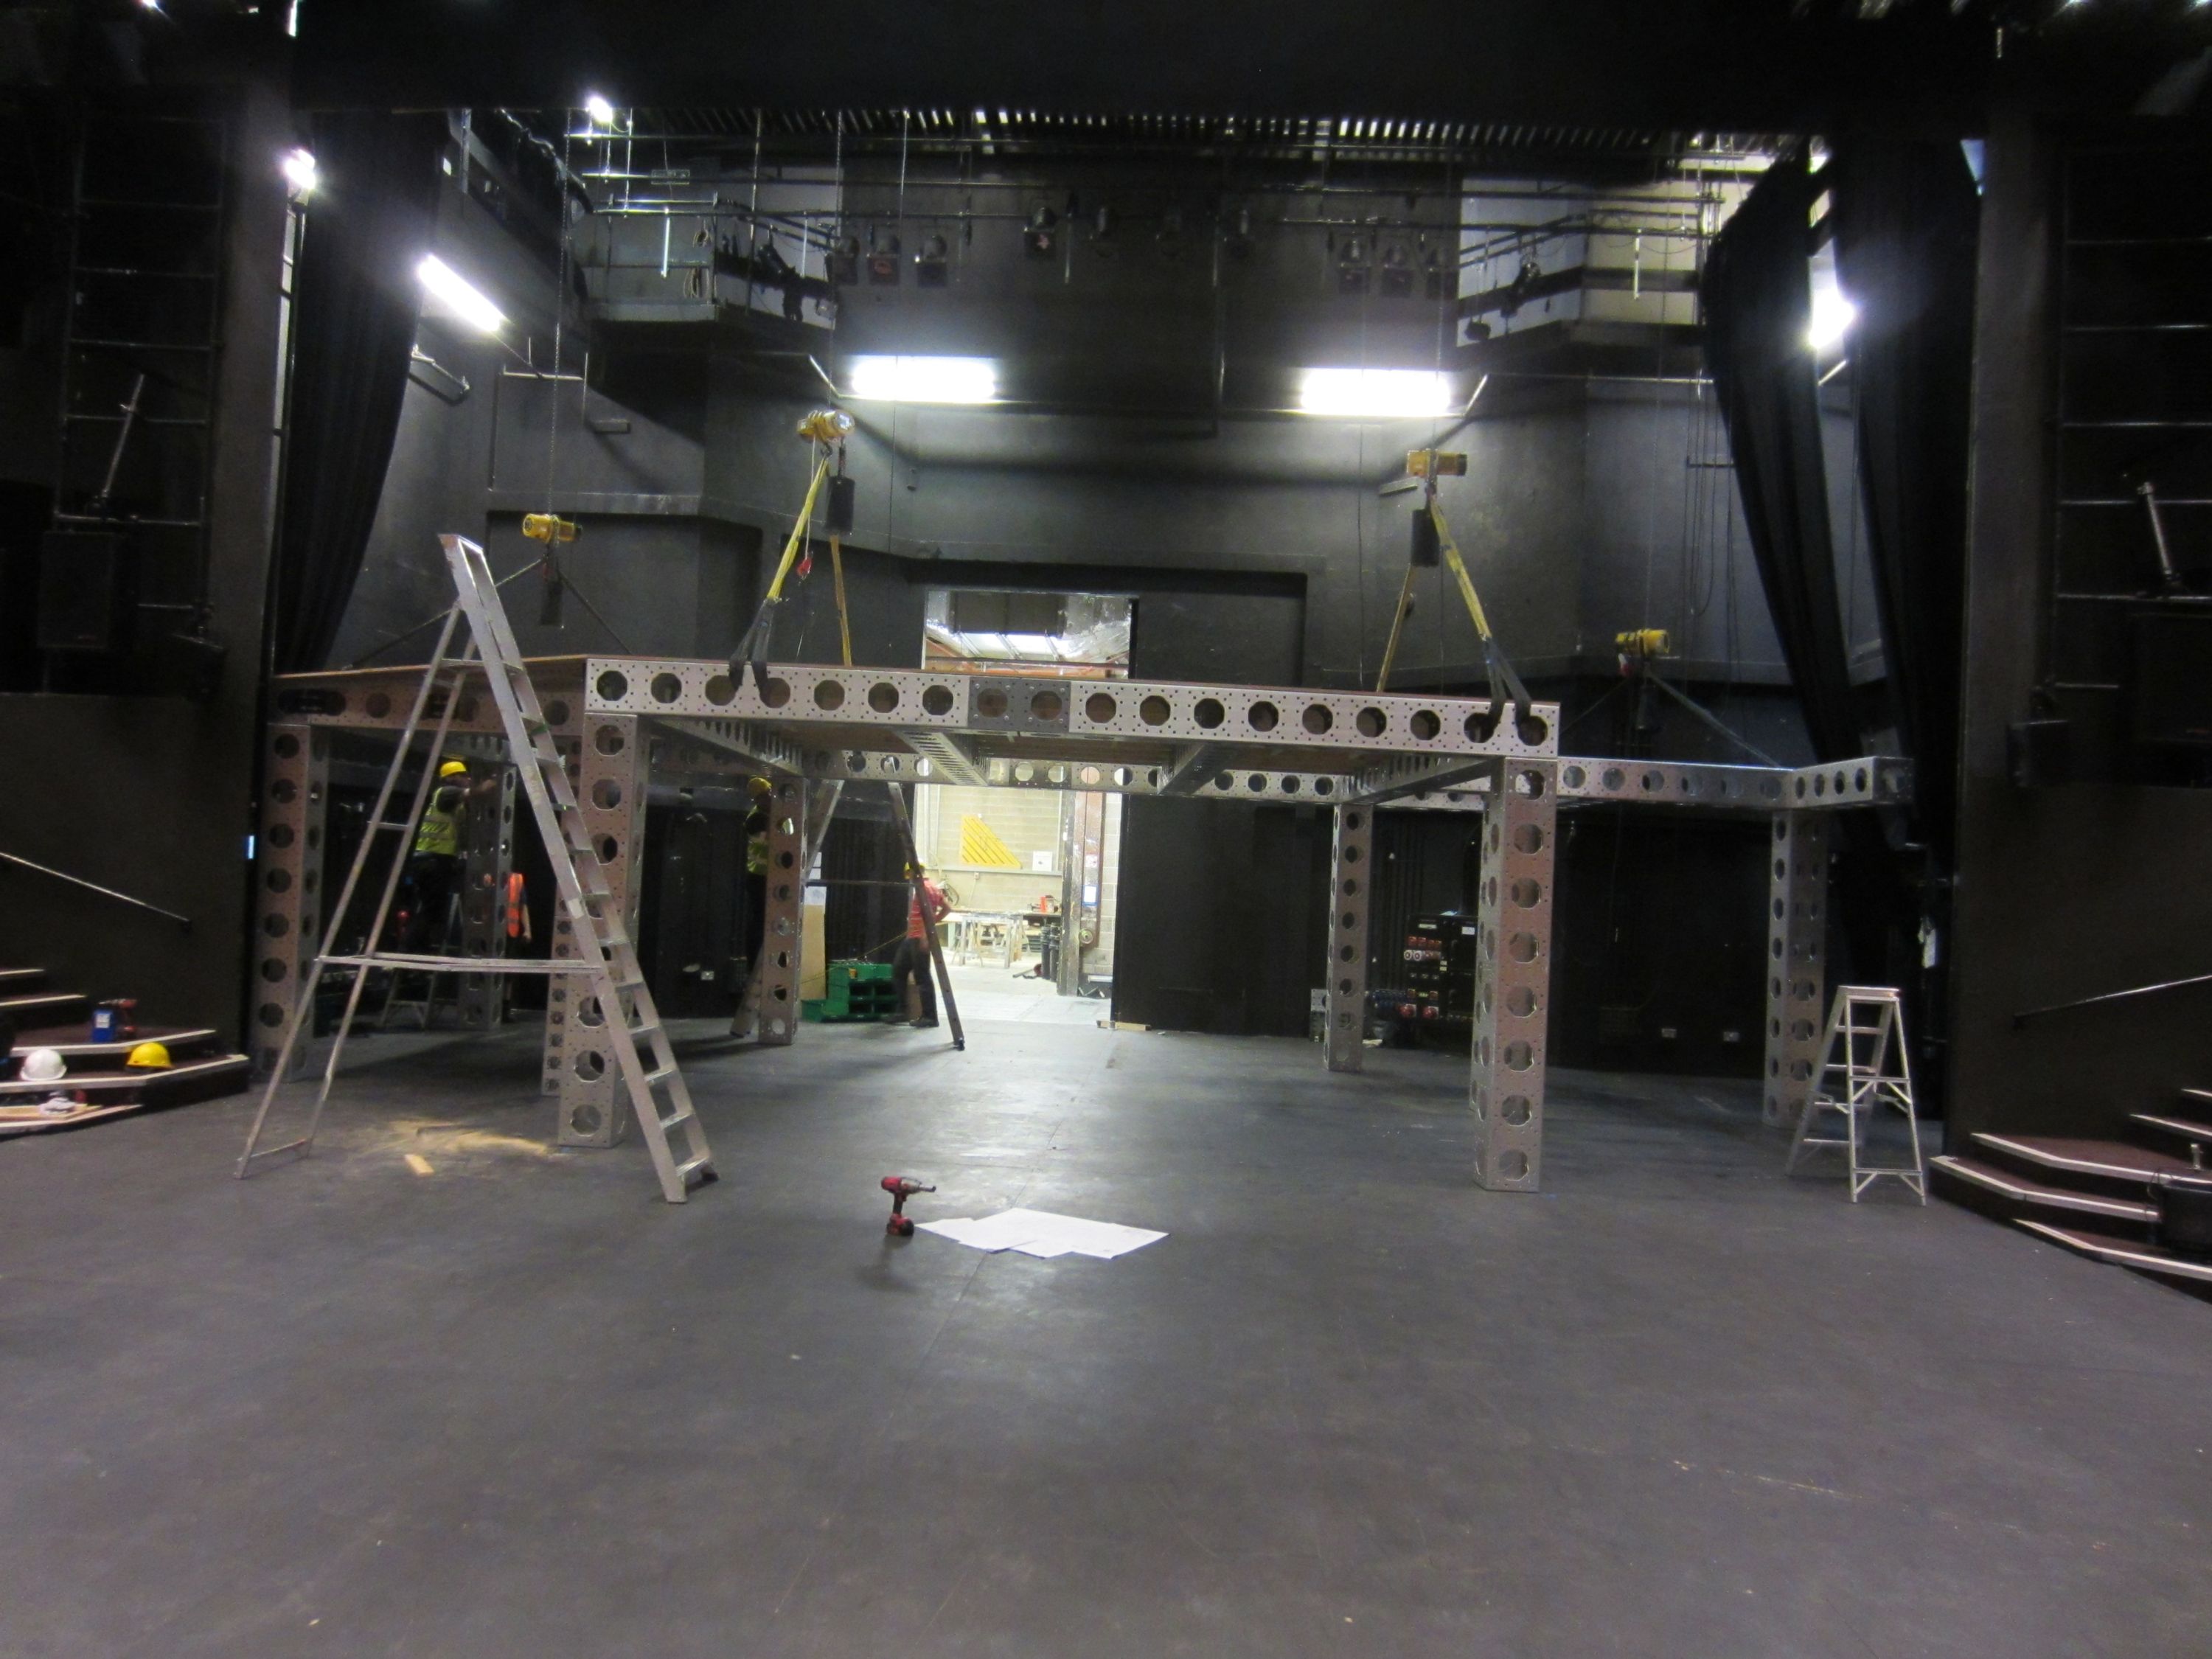 ModTruss being installed on stage at Sheffield Theatres